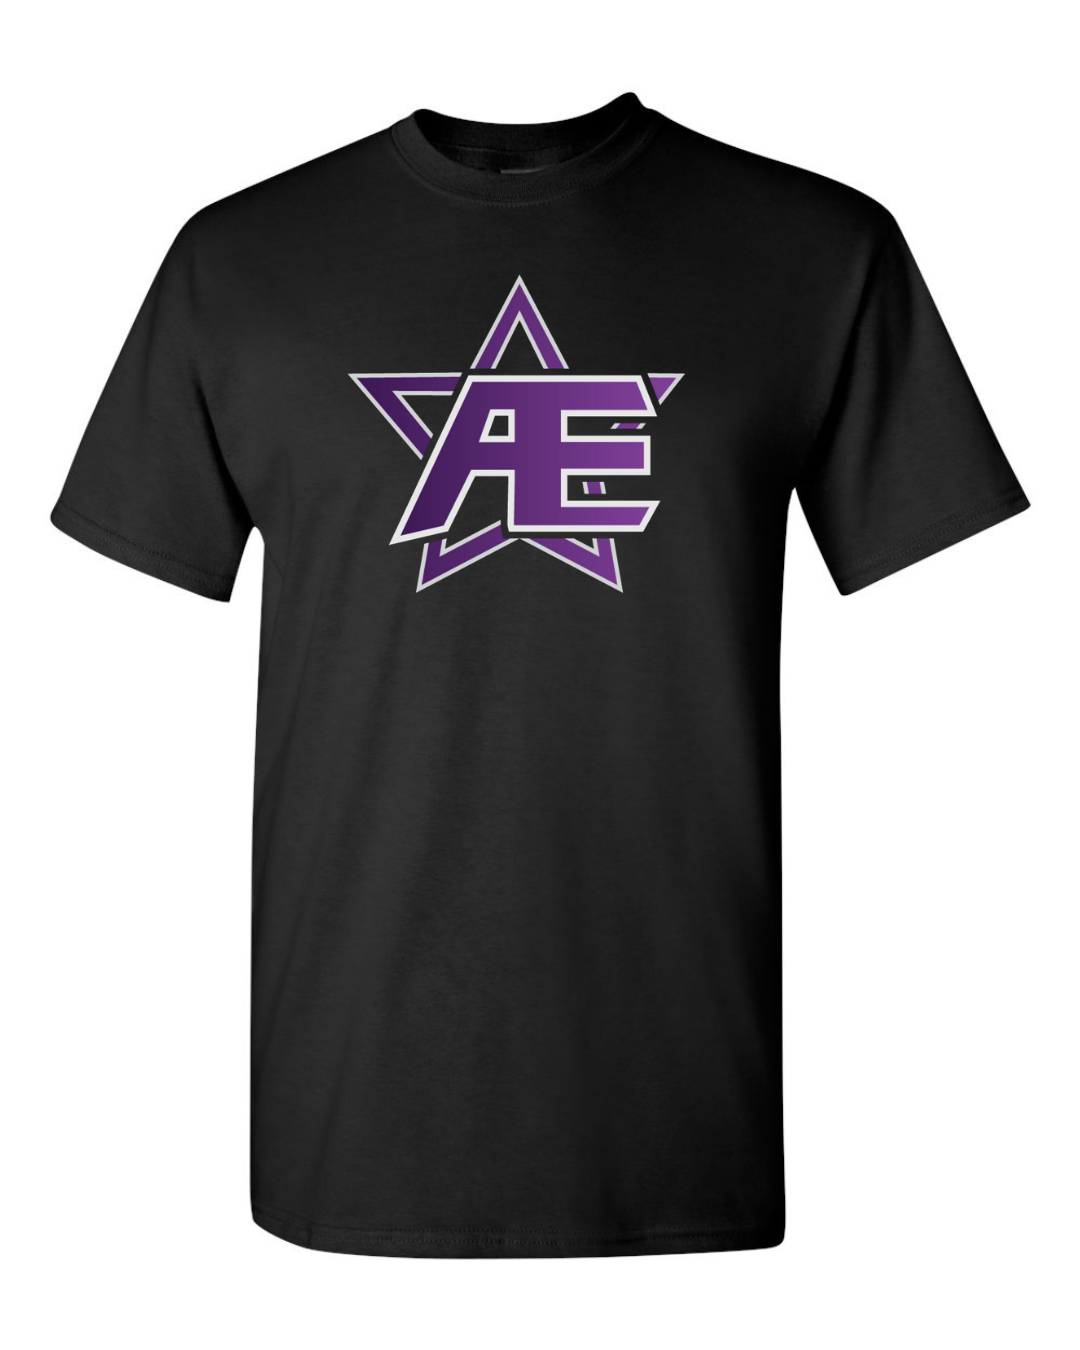 AE classic tee large on front